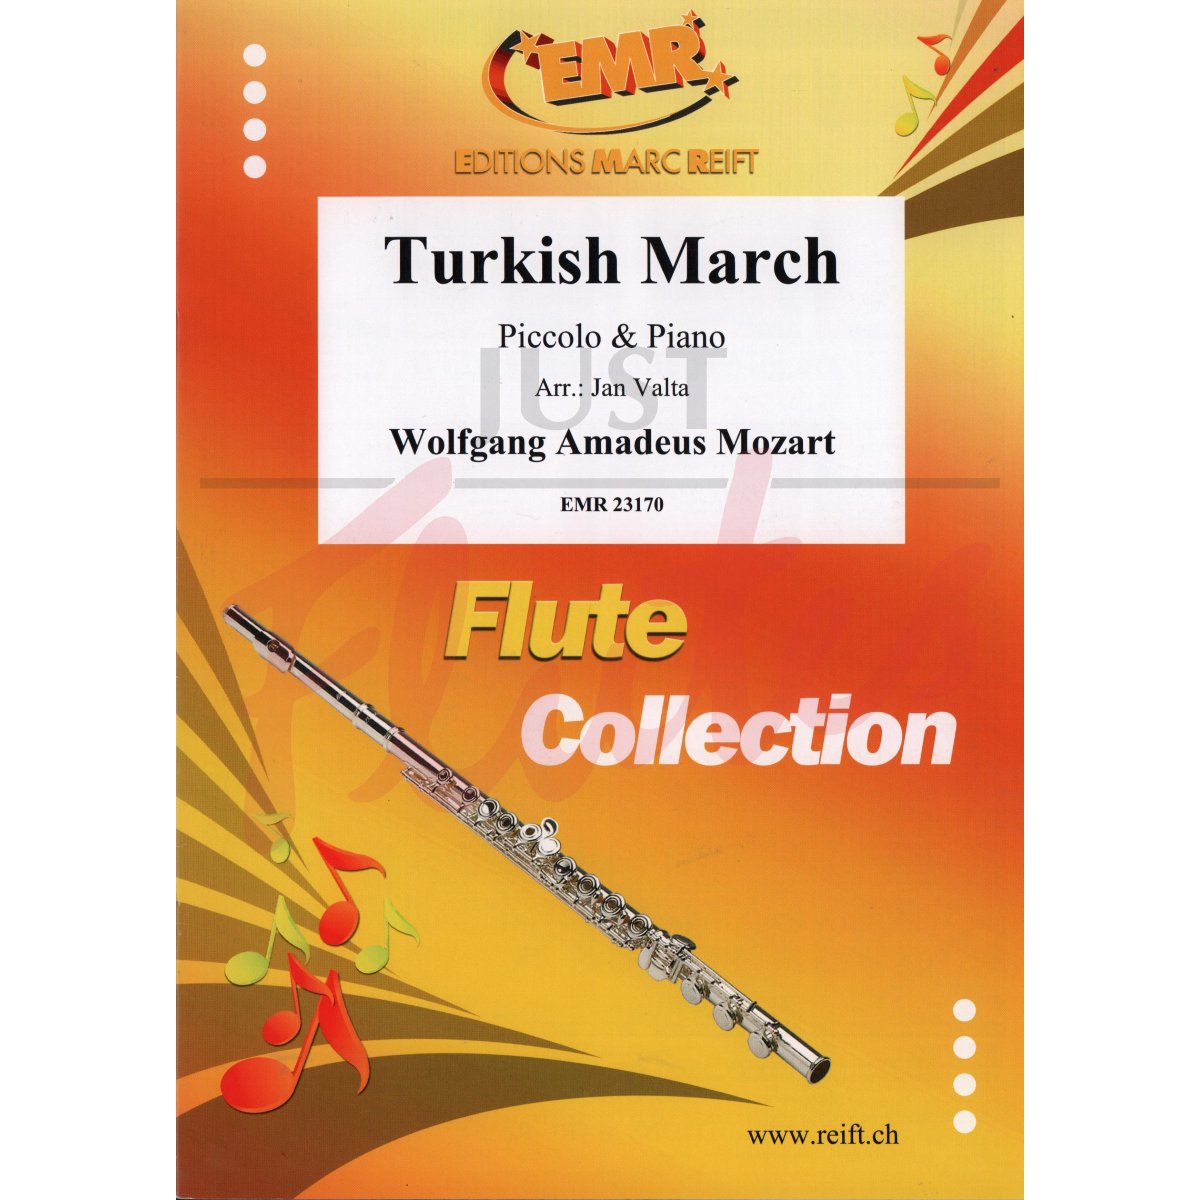 Turkish March for Piccolo and Piano